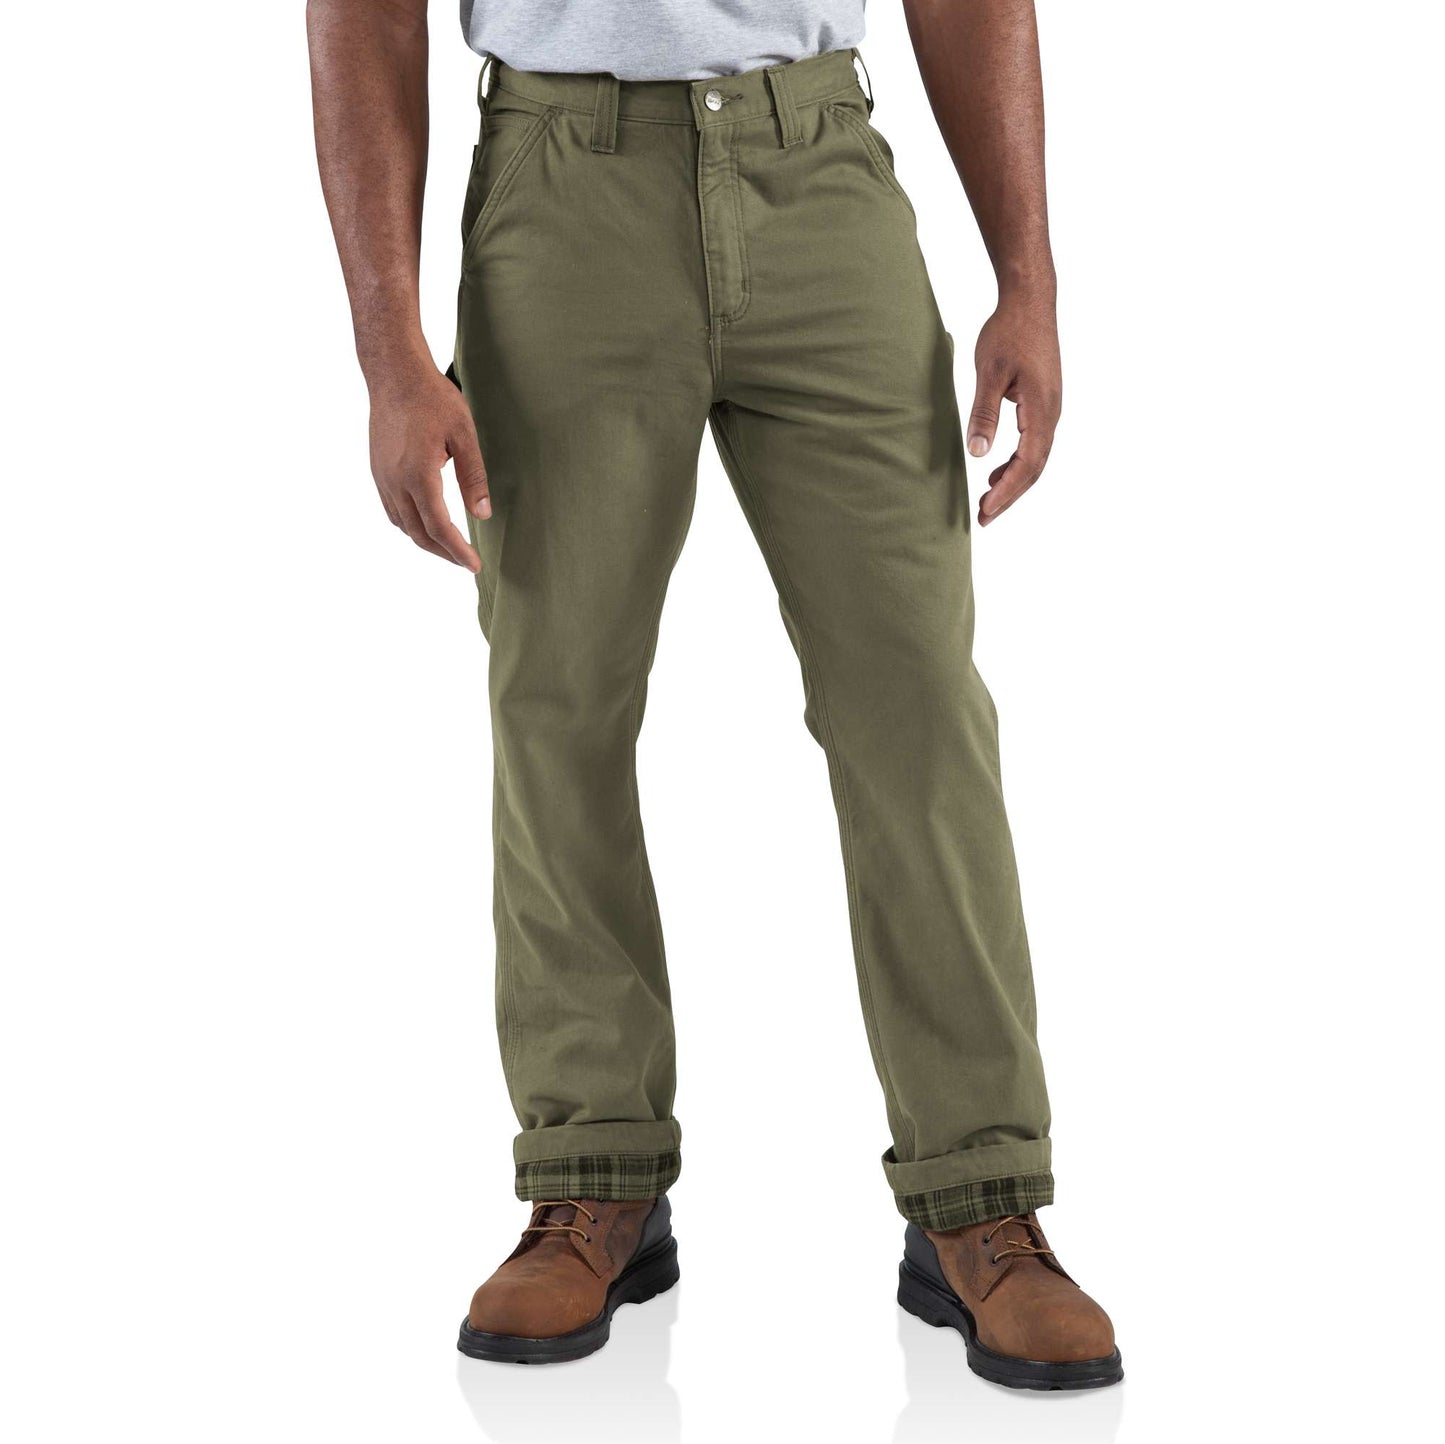 Carhartt Men's Flannel Lined Washed Twill Dungaree Pants